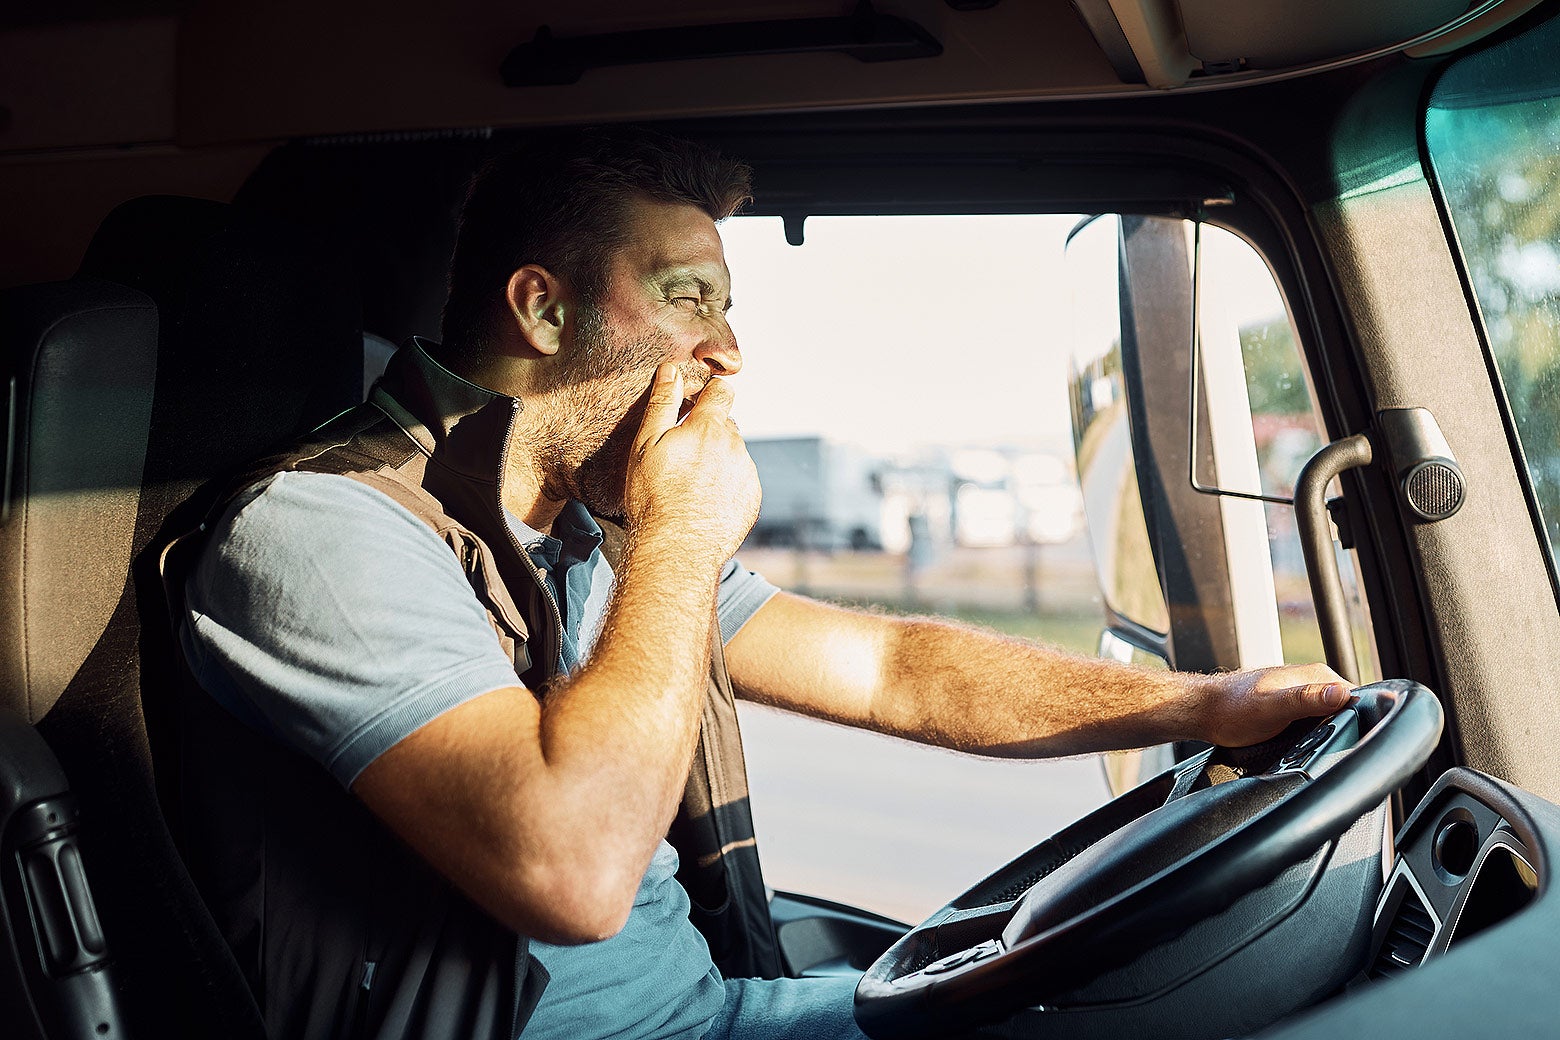 A driver behind the wheel of a truck yawns.